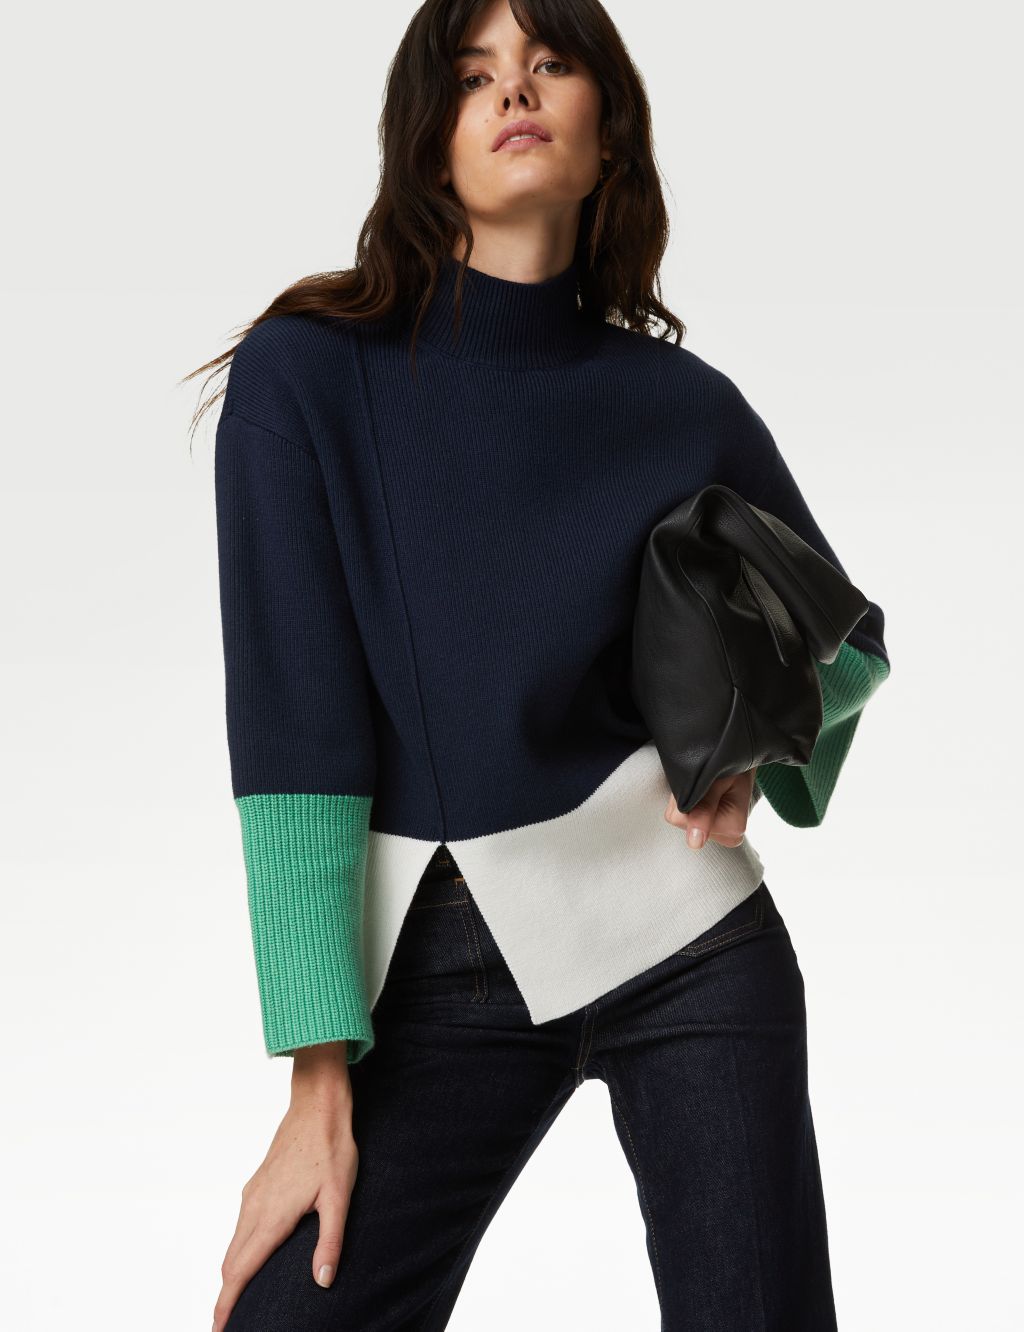 Cotton With Merino Wool Colour Block Jumper image 1